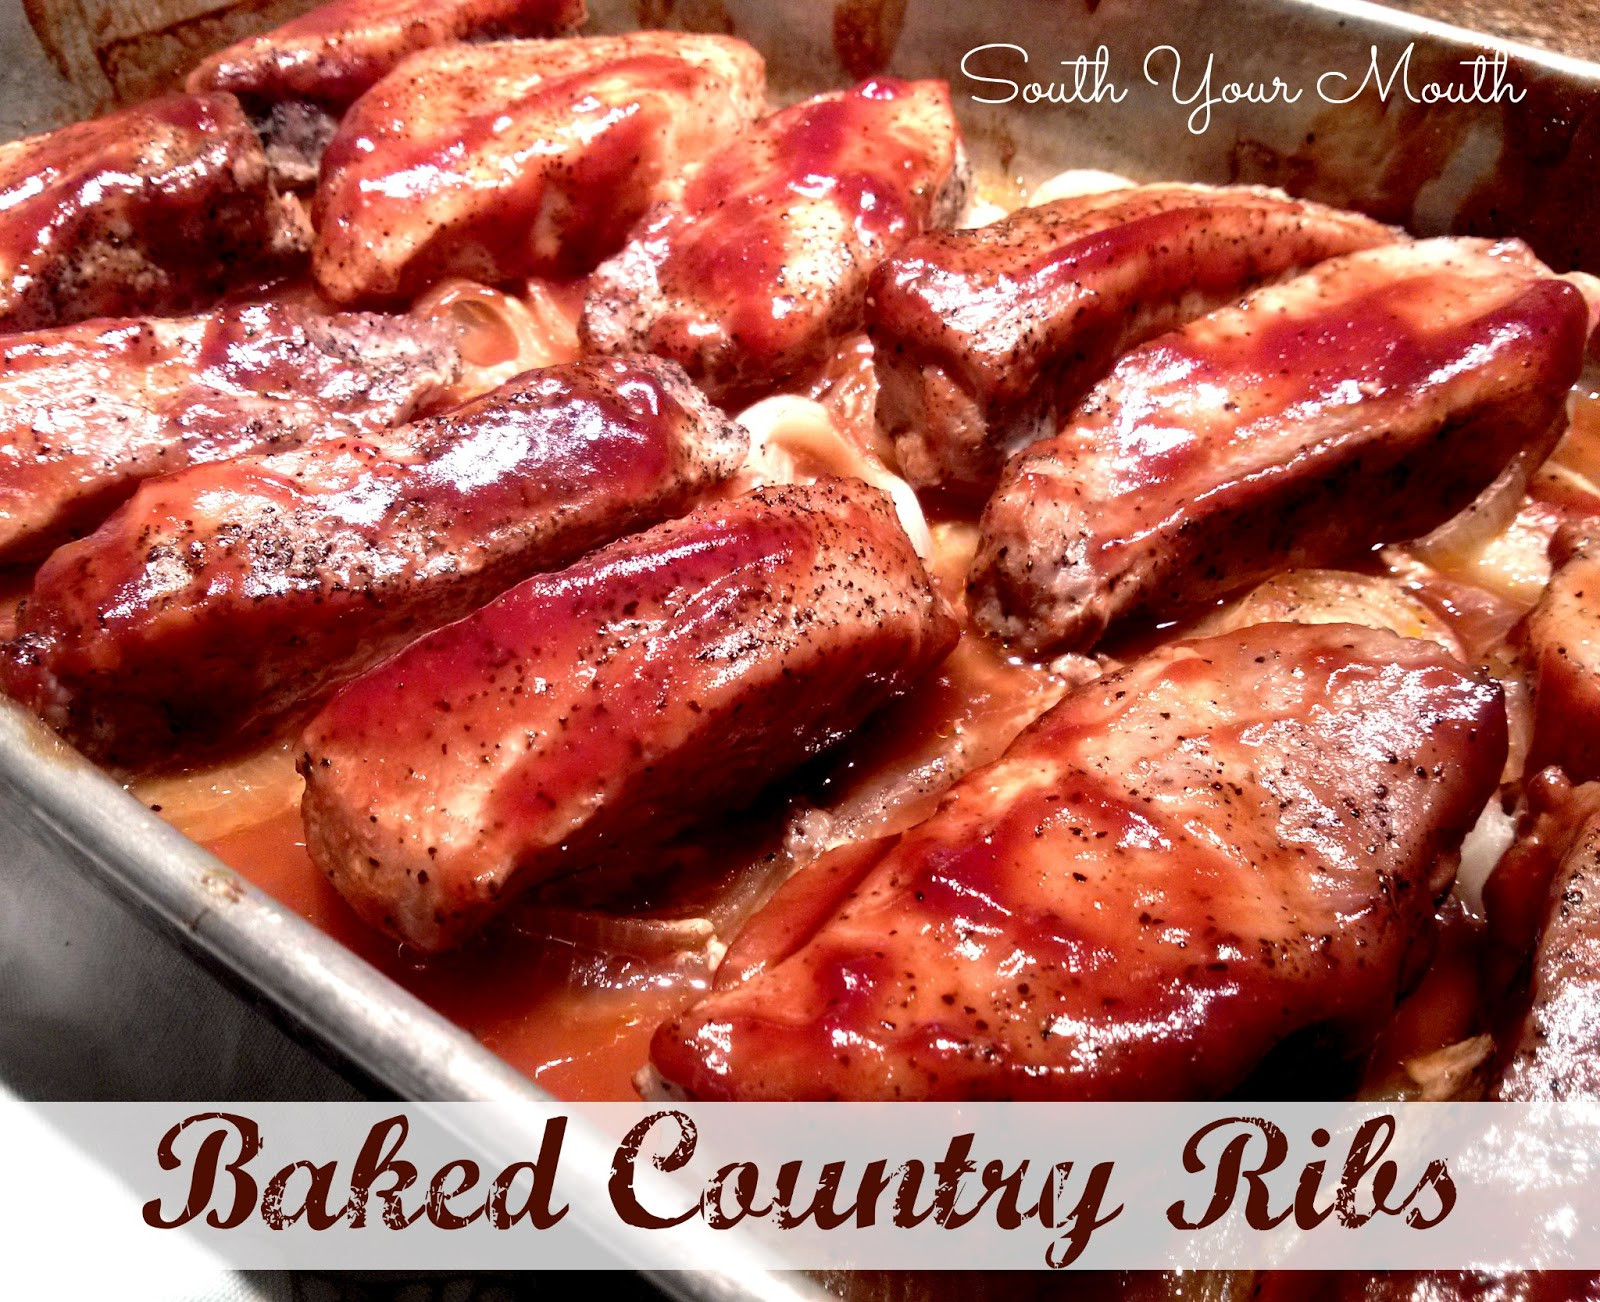 Pork Country Ribs
 South Your Mouth Baked Country Ribs